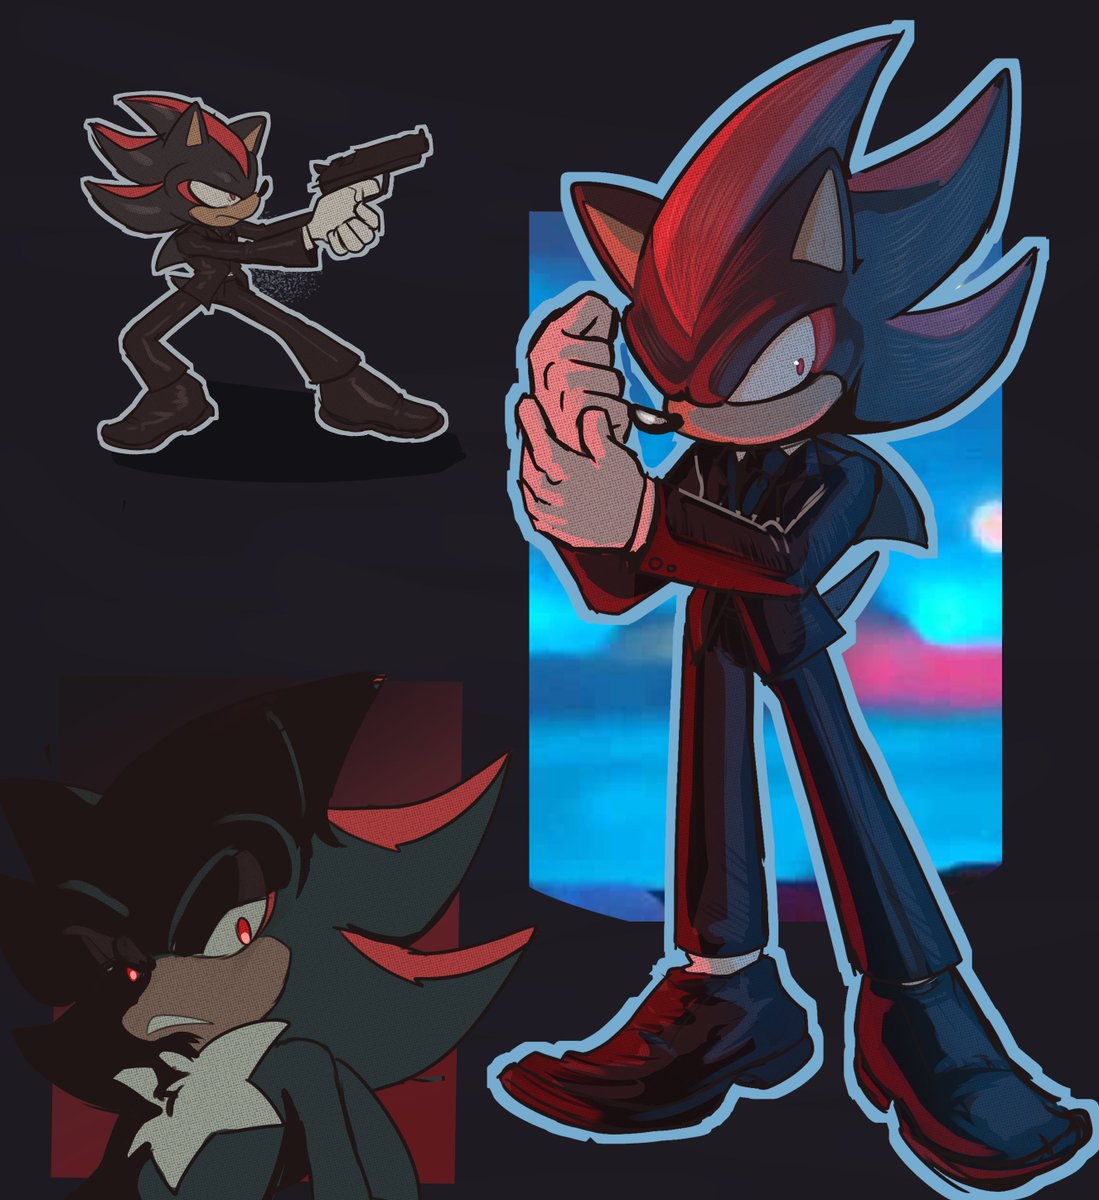 It's a little late but I also wanted to draw Shadow as John Wick